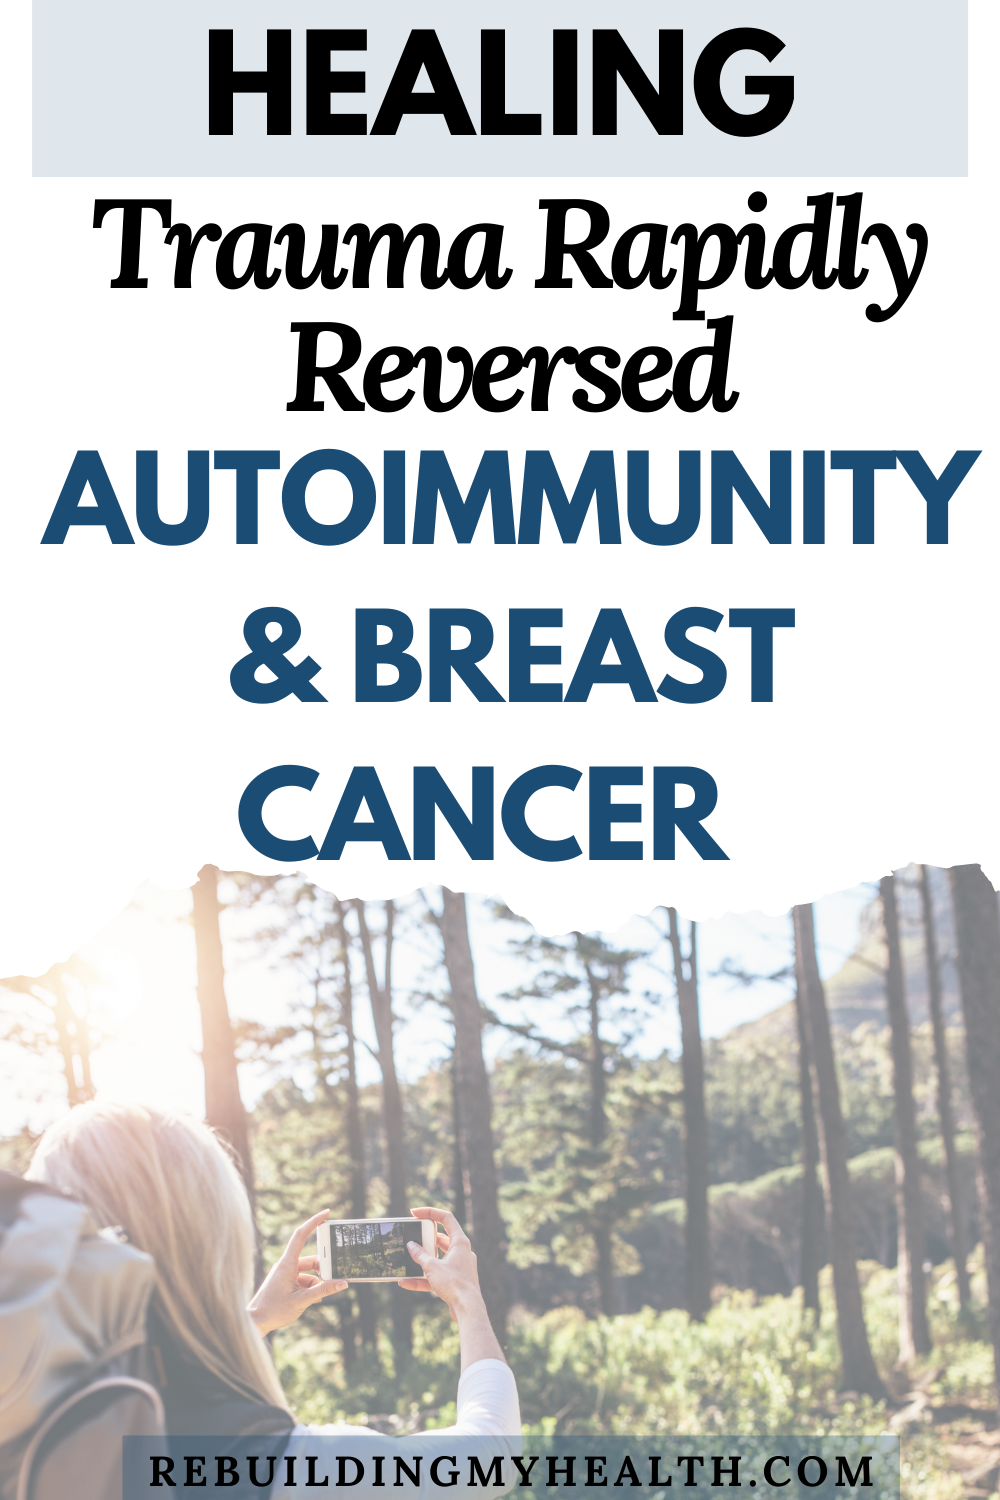 Keesha Ewers first healed autoimmunity, then later breast cancer, primarily through resolving childhood trauma.